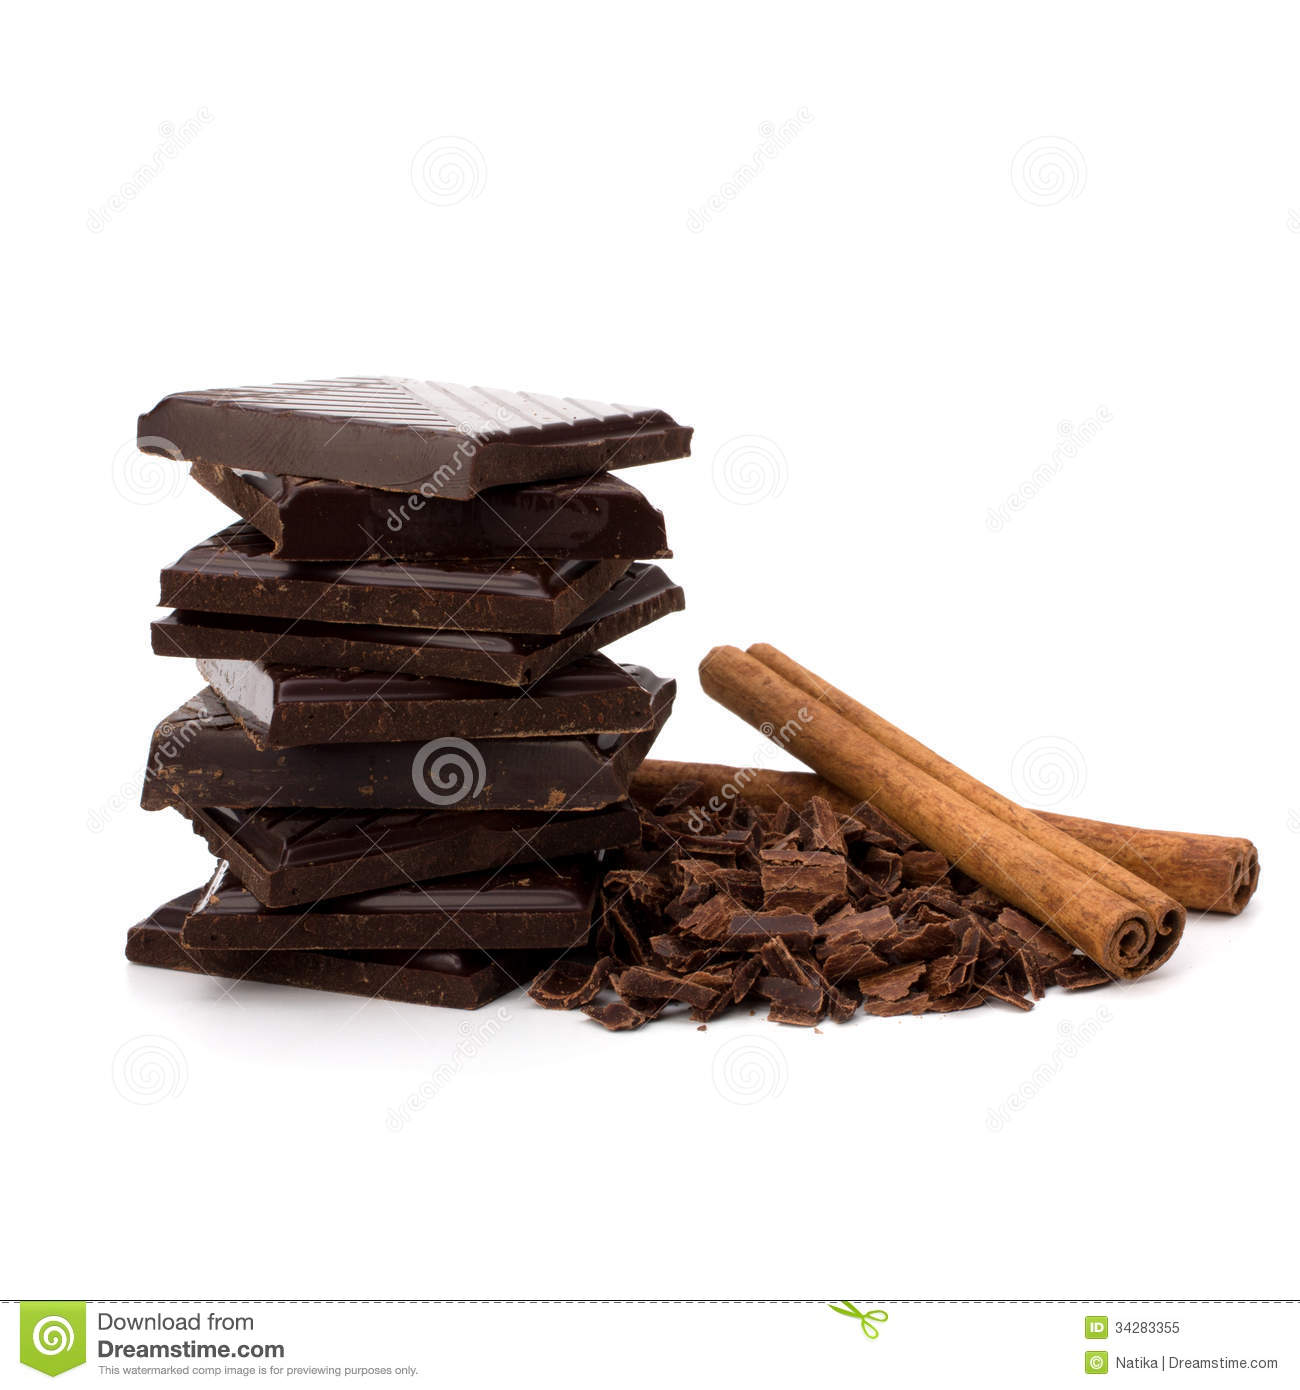 Chocolate Bars Stack And Cinnamon Sticks Isolated On White Background 